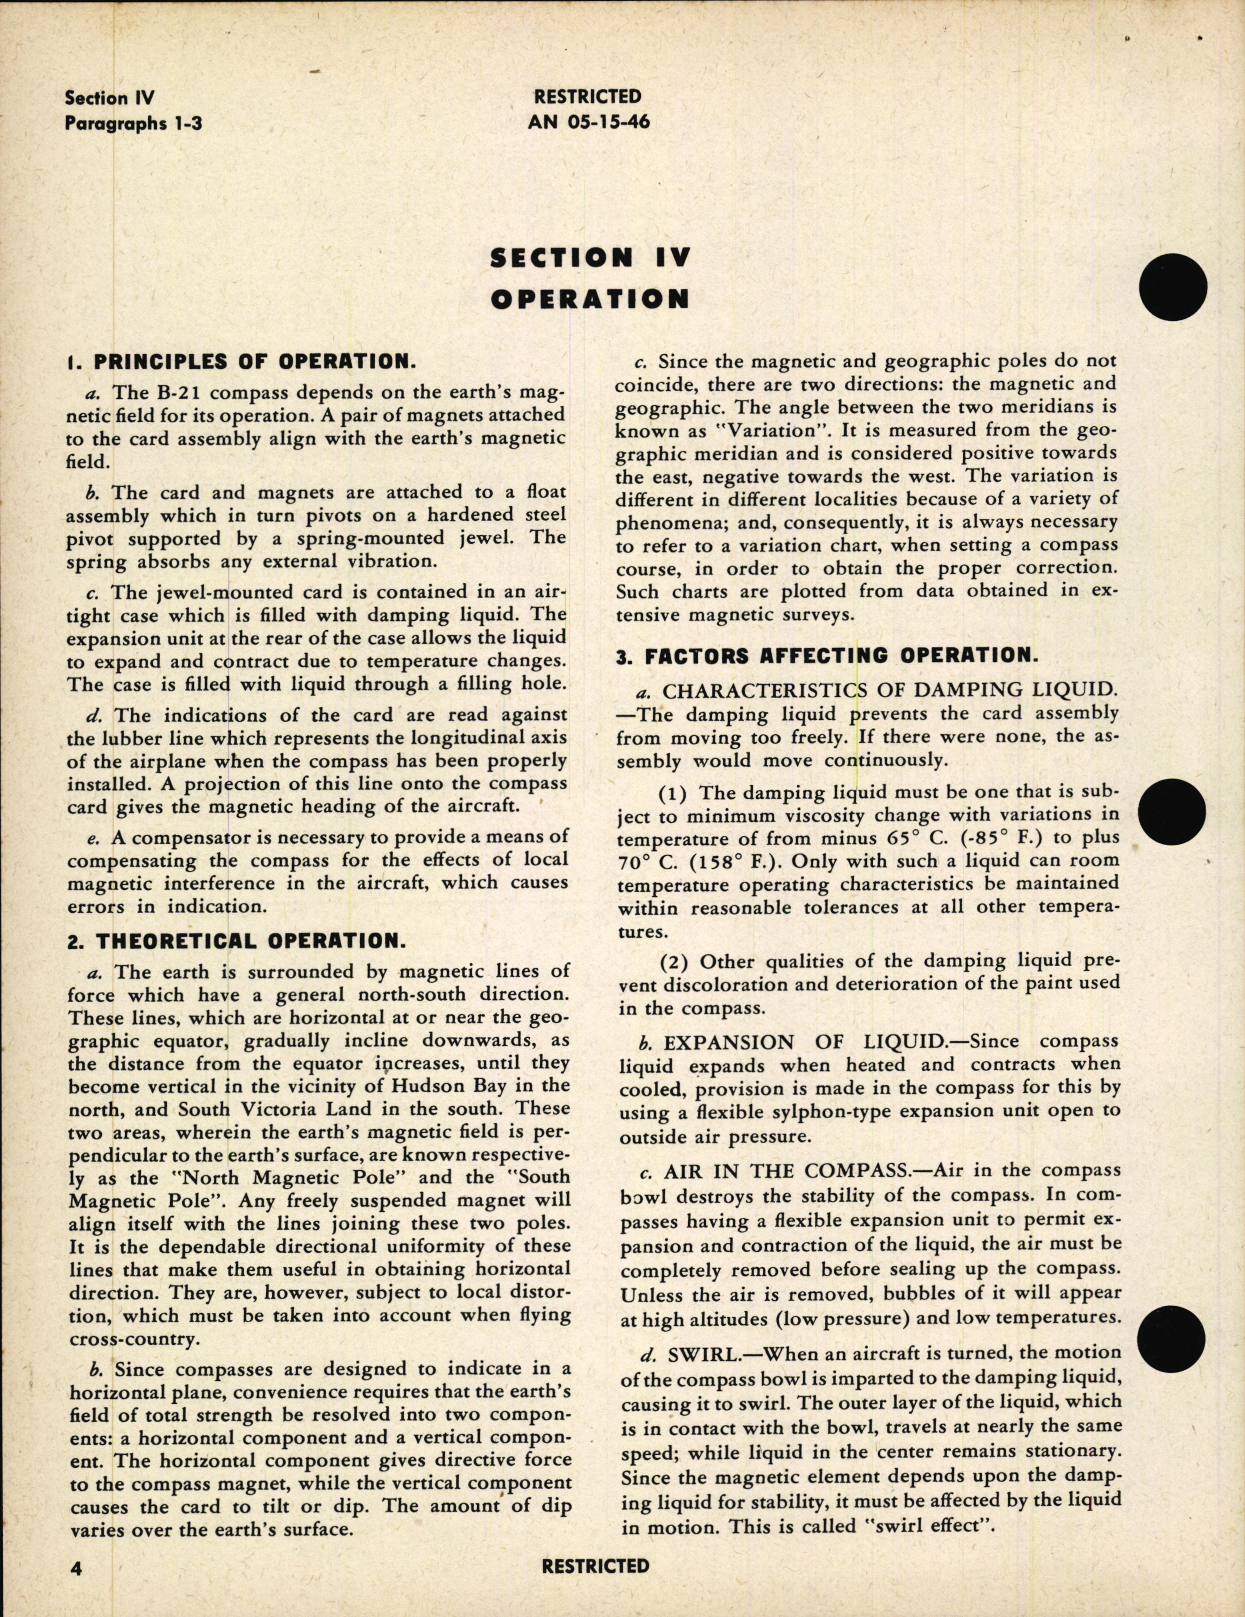 Sample page 8 from AirCorps Library document: Handbook of Instructions with Parts Catalog for Magnetic Compass Type B-21